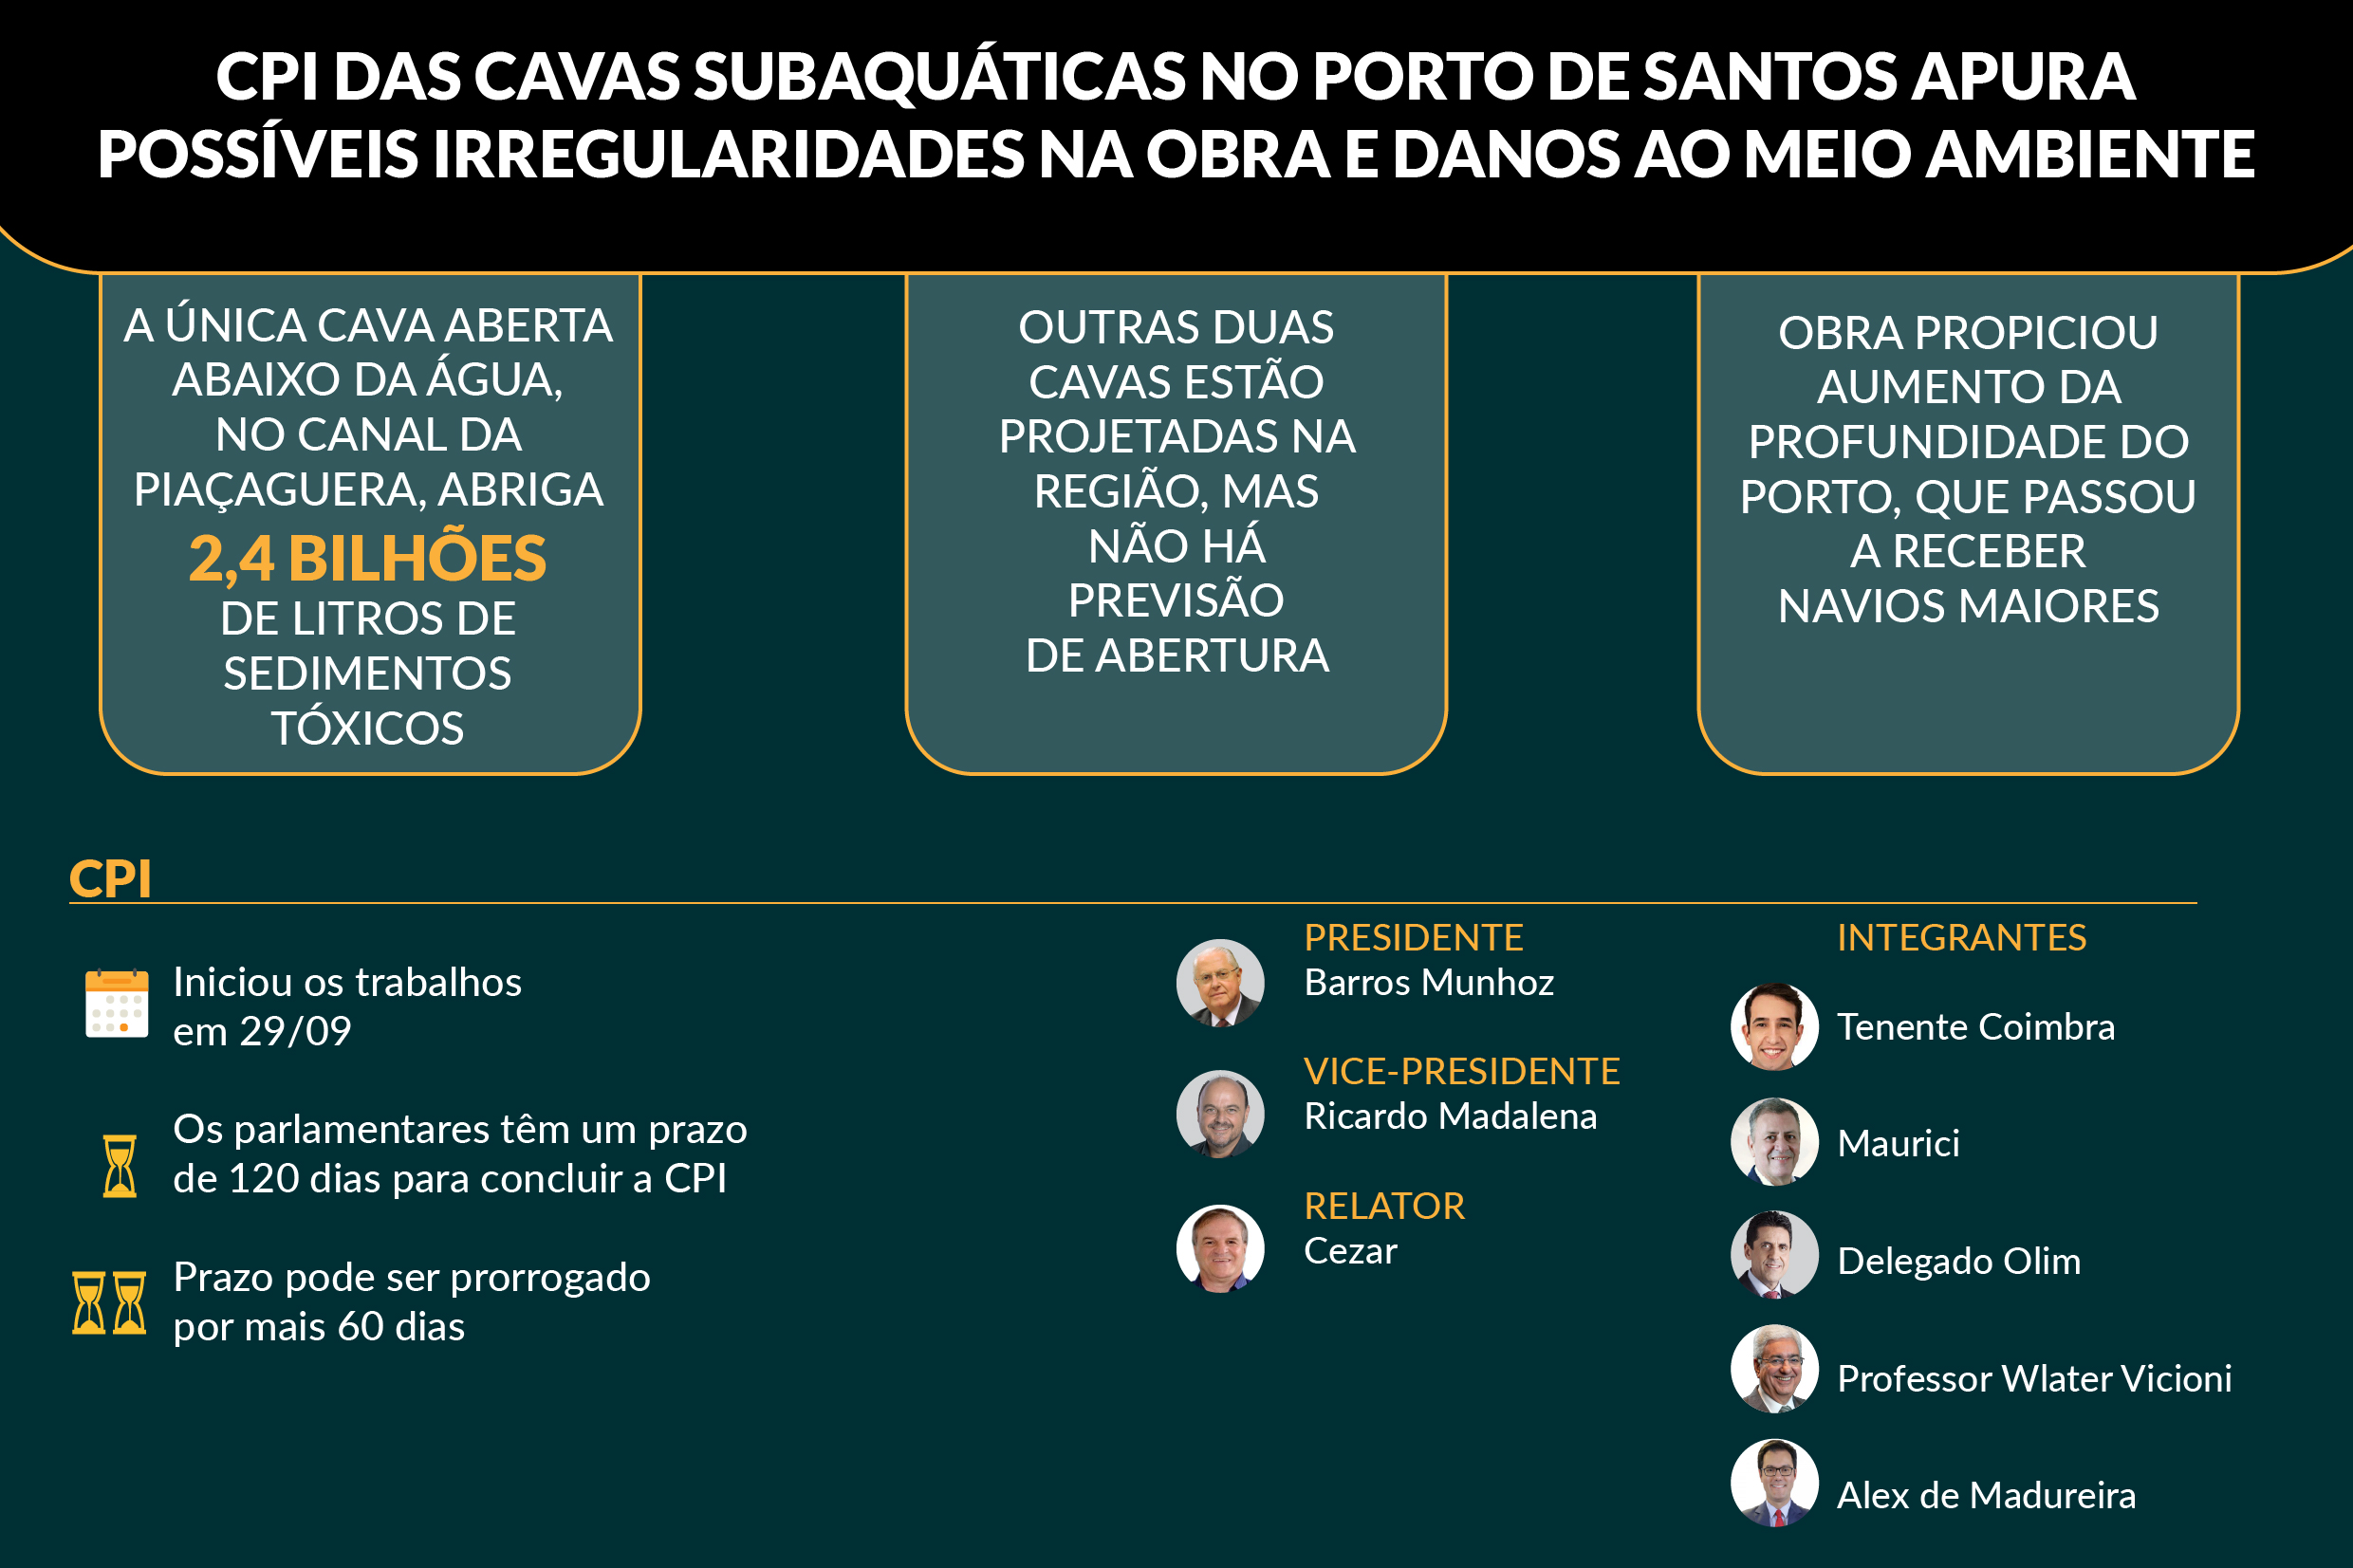 Infográfico <a style='float:right' href='https://www3.al.sp.gov.br/repositorio/noticia/N-11-2021/fg278697.jpg' target=_blank><img src='/_img/material-file-download-white.png' width='14px' alt='Clique para baixar a imagem'></a>